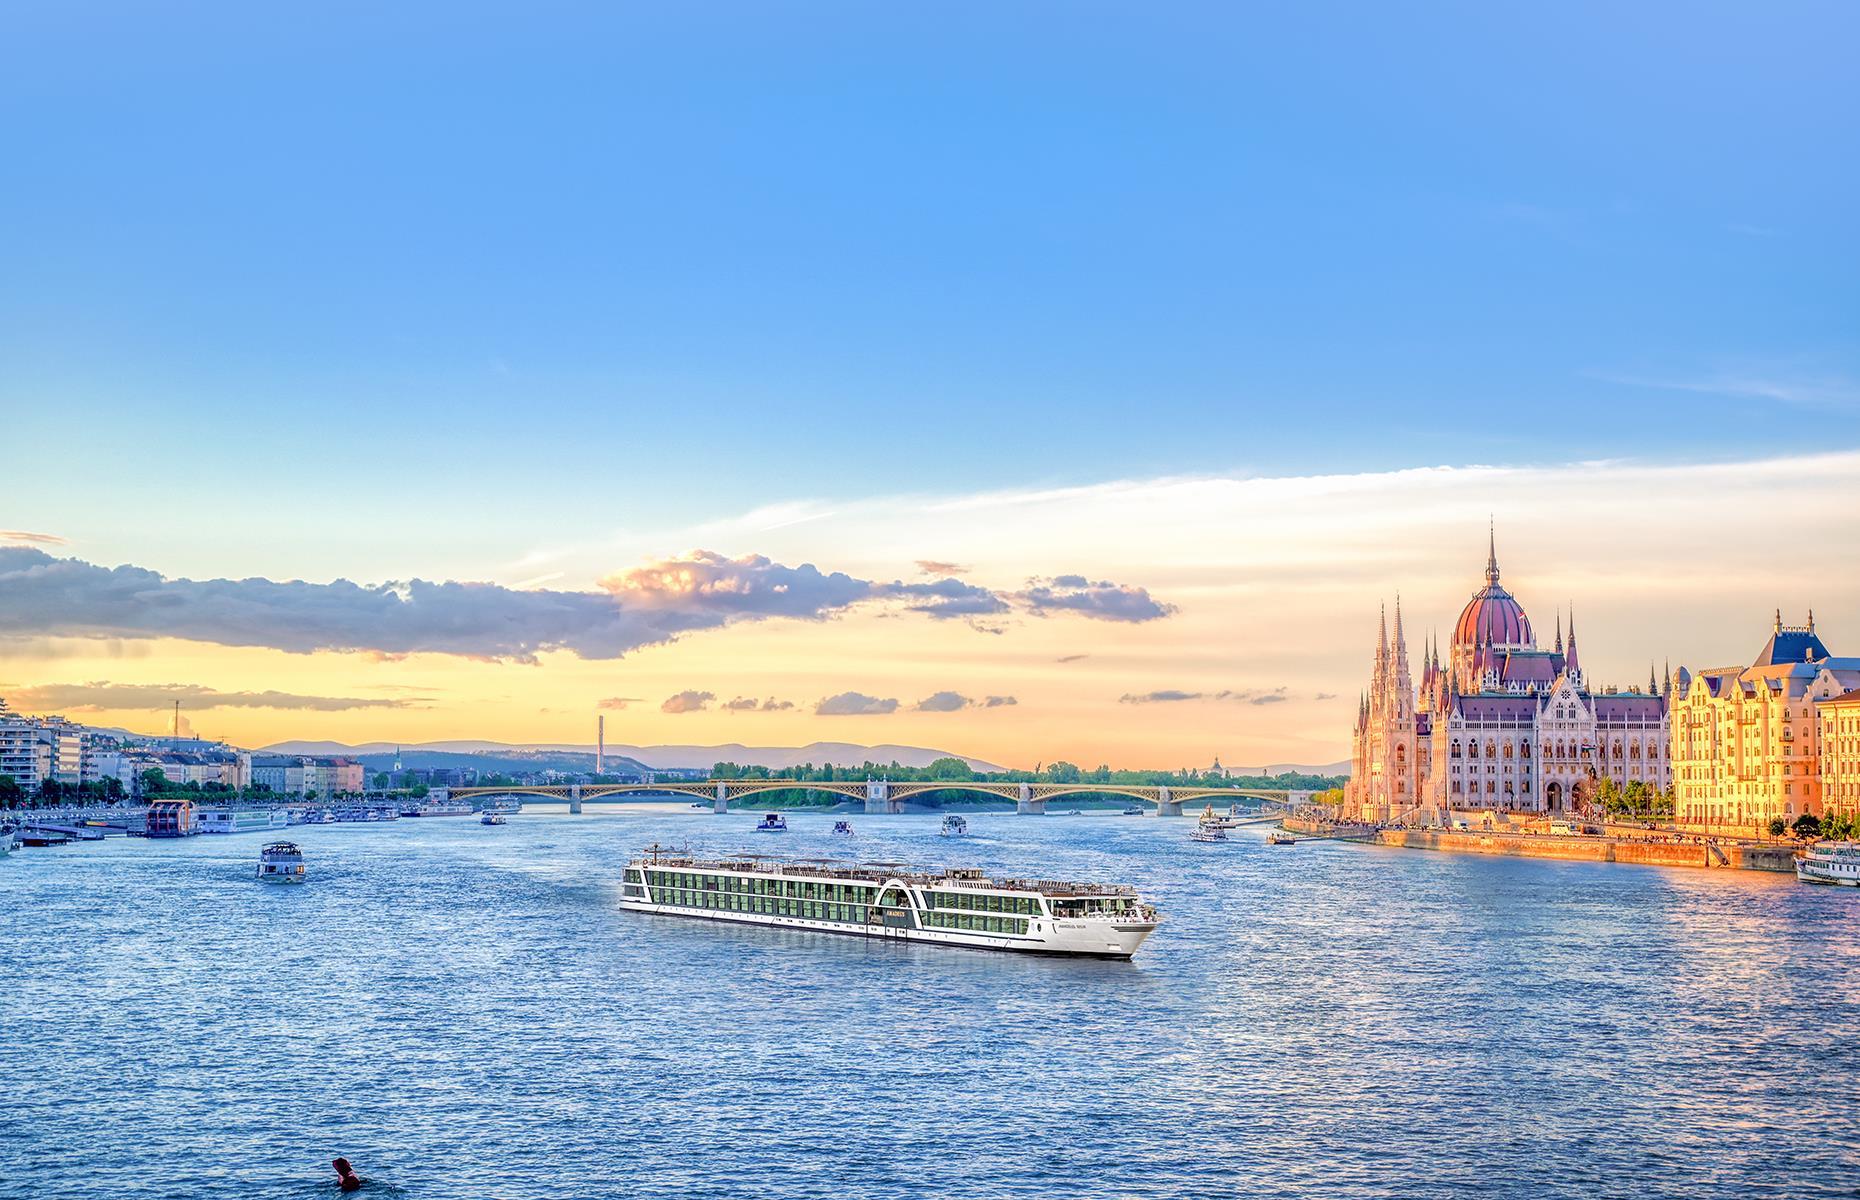 Whether you’re considering a river cruise for the first time or you’ve been navigating the world’s rivers for years, we’ve got 28 fabulous reasons to book a river cruise – from a leisurely float down the marvellous Mekong, to a cruise along the Hudson River.